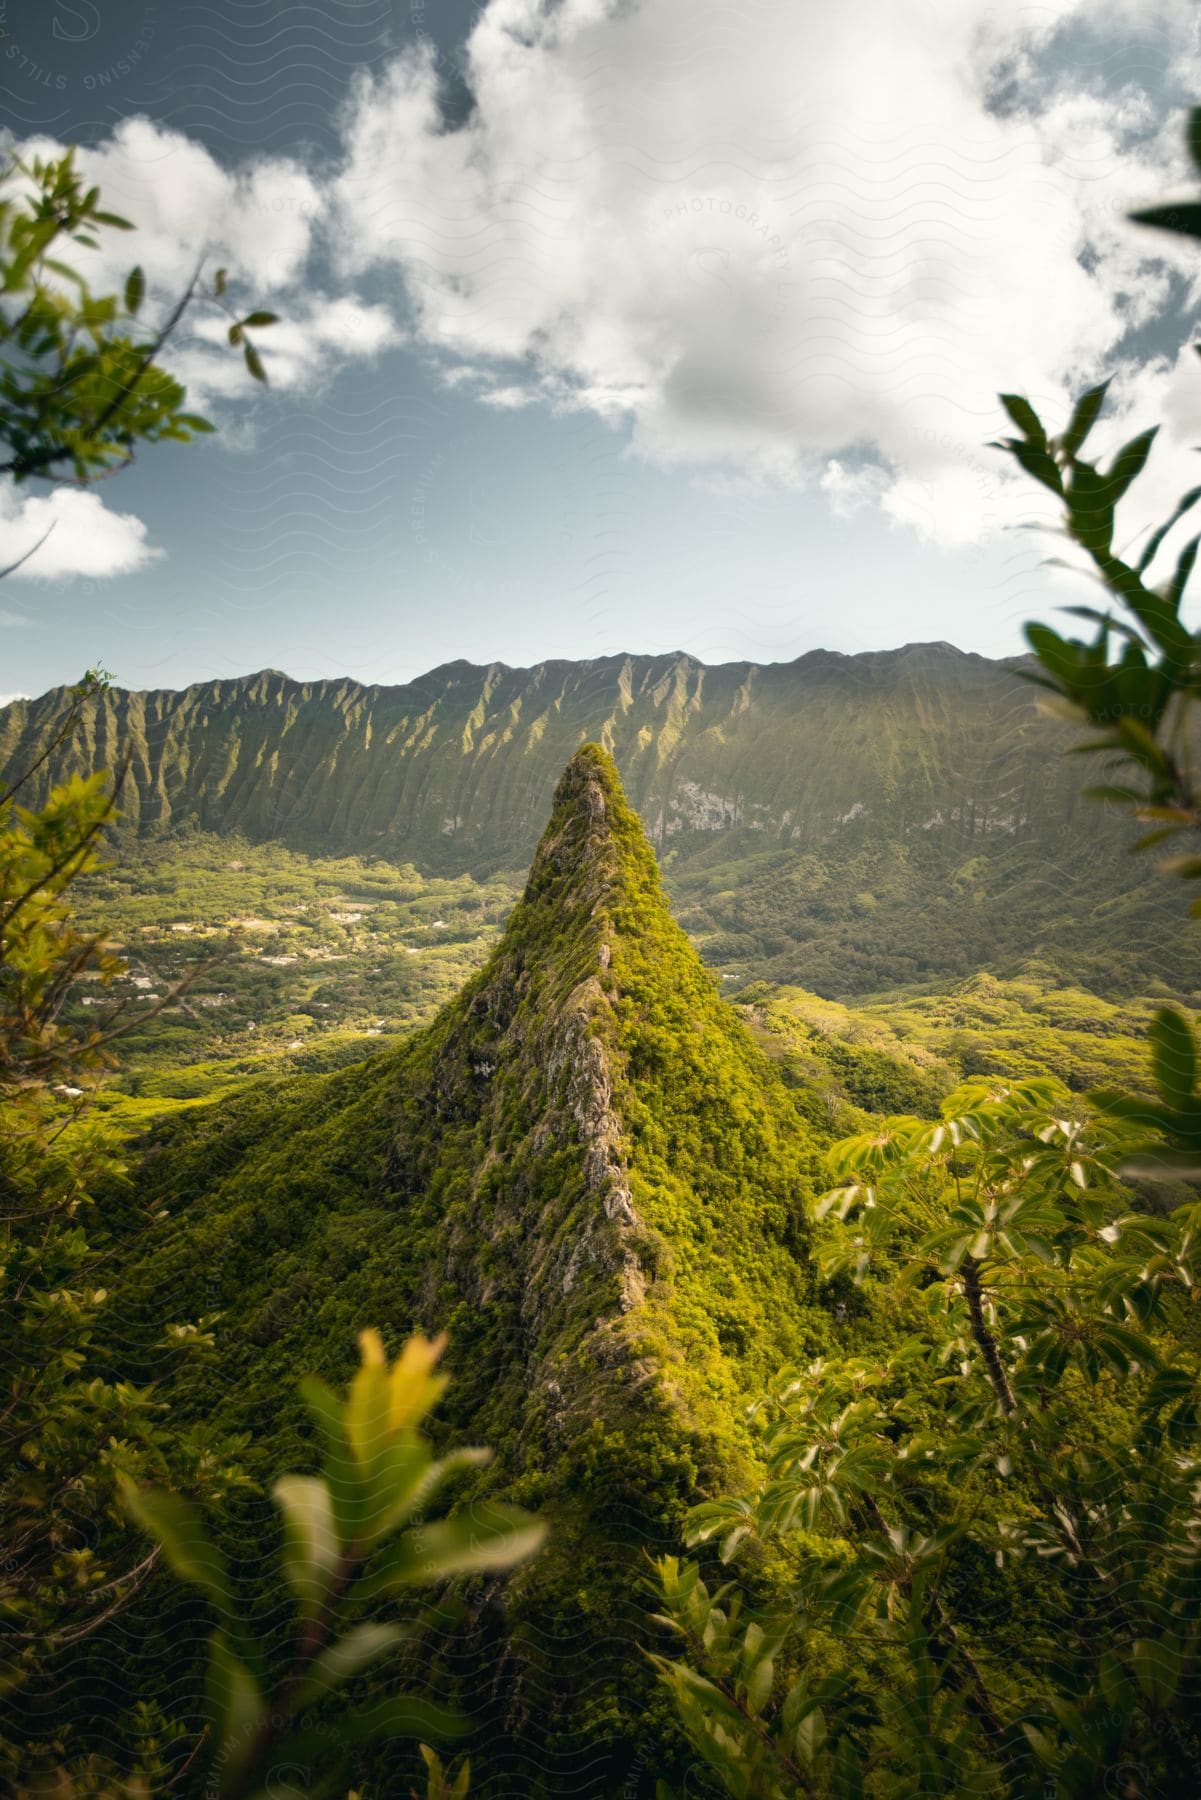 Narrow, elongated mountain peak surrounded by dense, lush vegetation with mountains in the background.